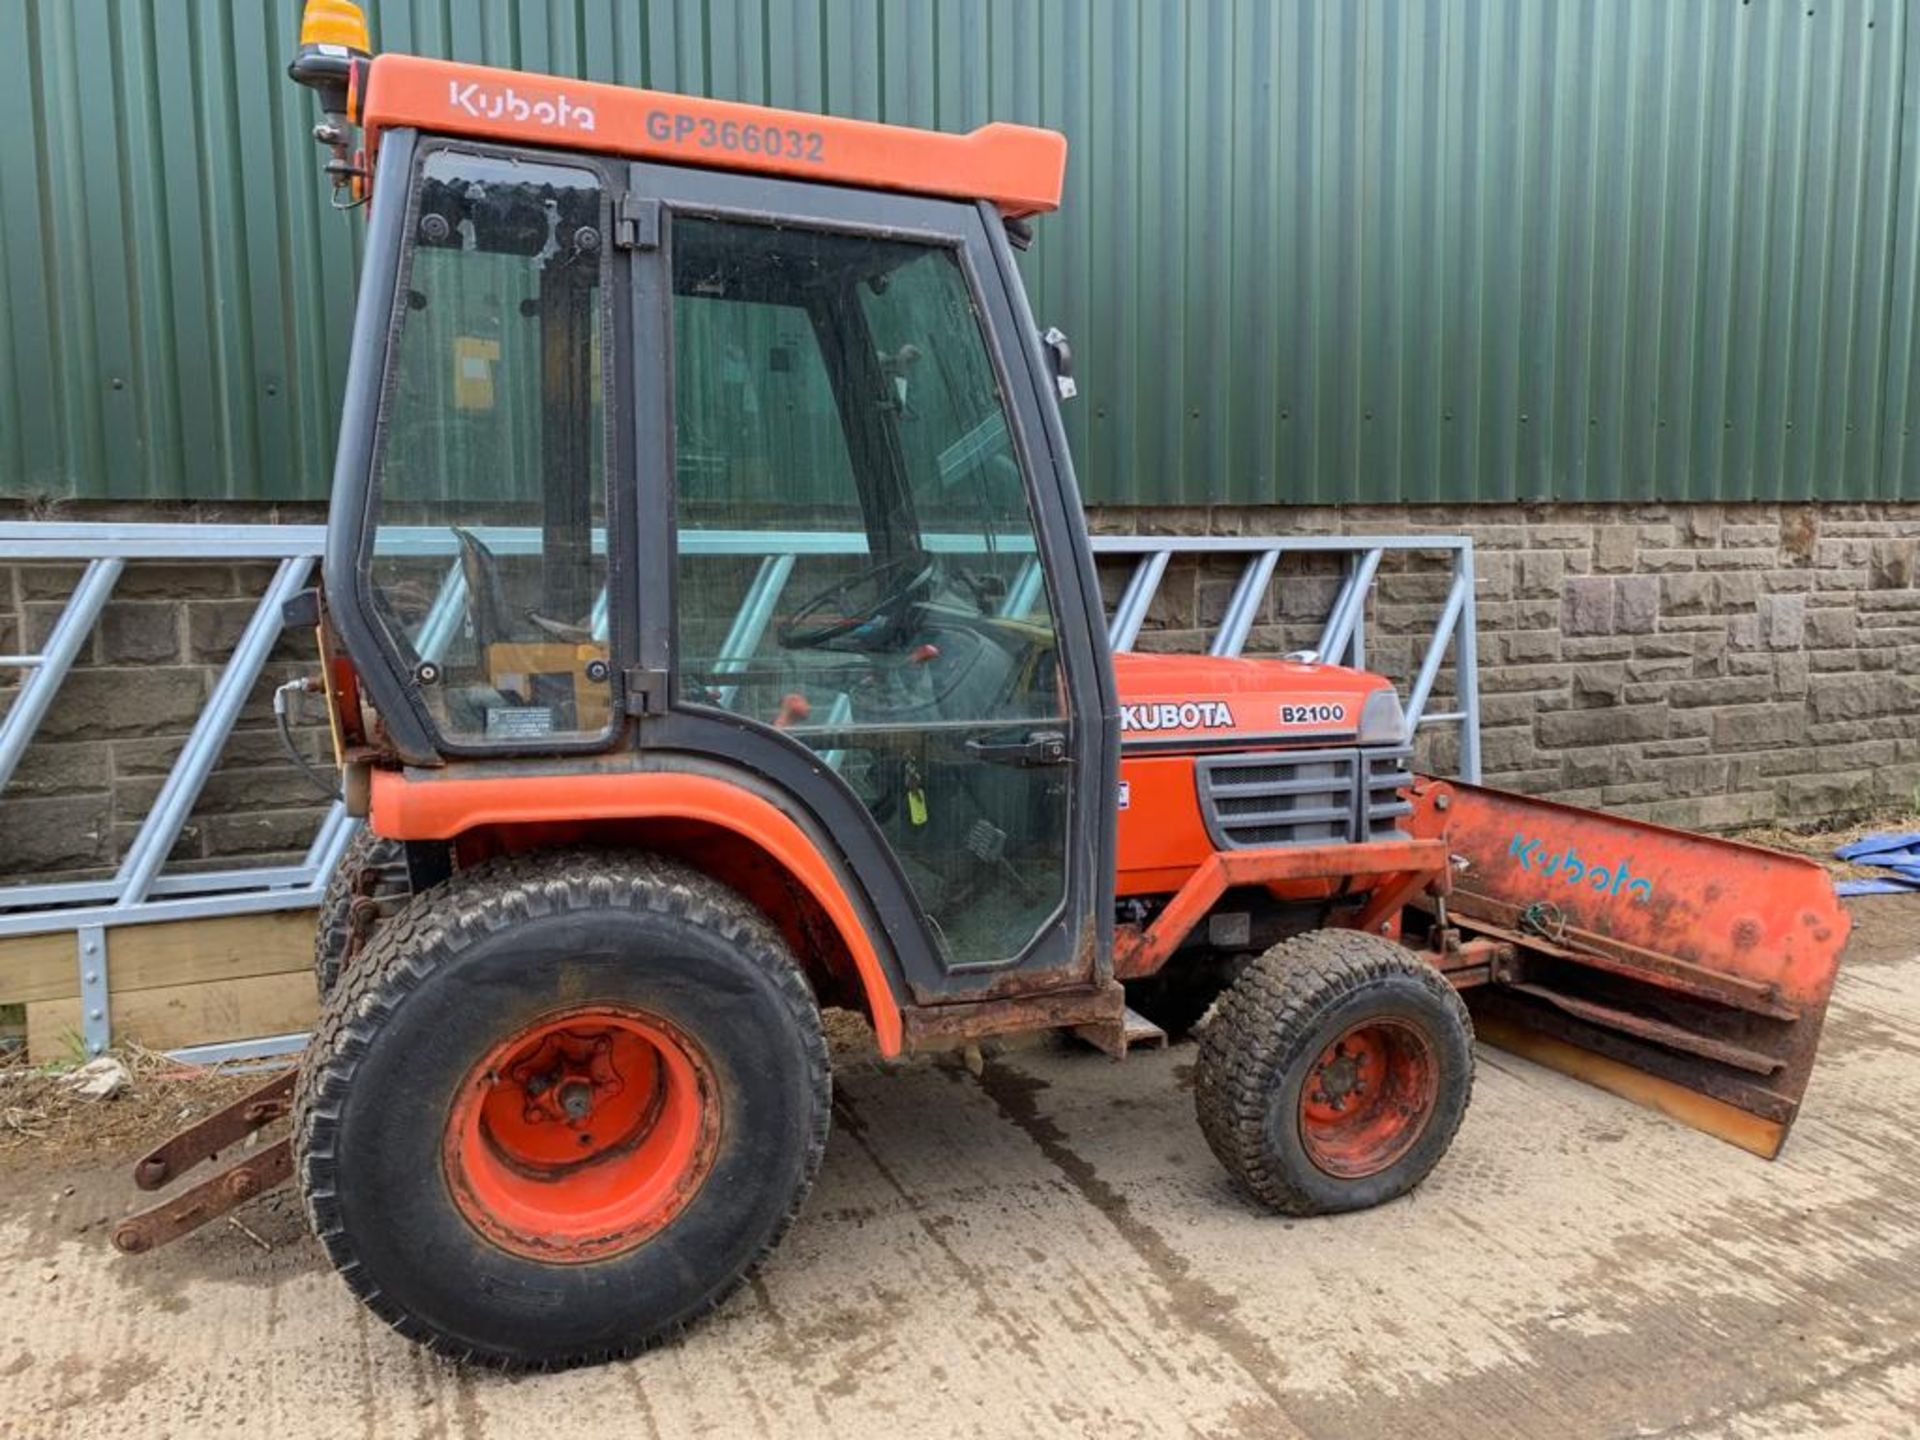 2000/X REG KUBOTA B2100 COMPACT TRACTOR WITH FULL GLASS CAB C/W PLOUGH ATTACHMENT *PLUS VAT* - Image 2 of 11